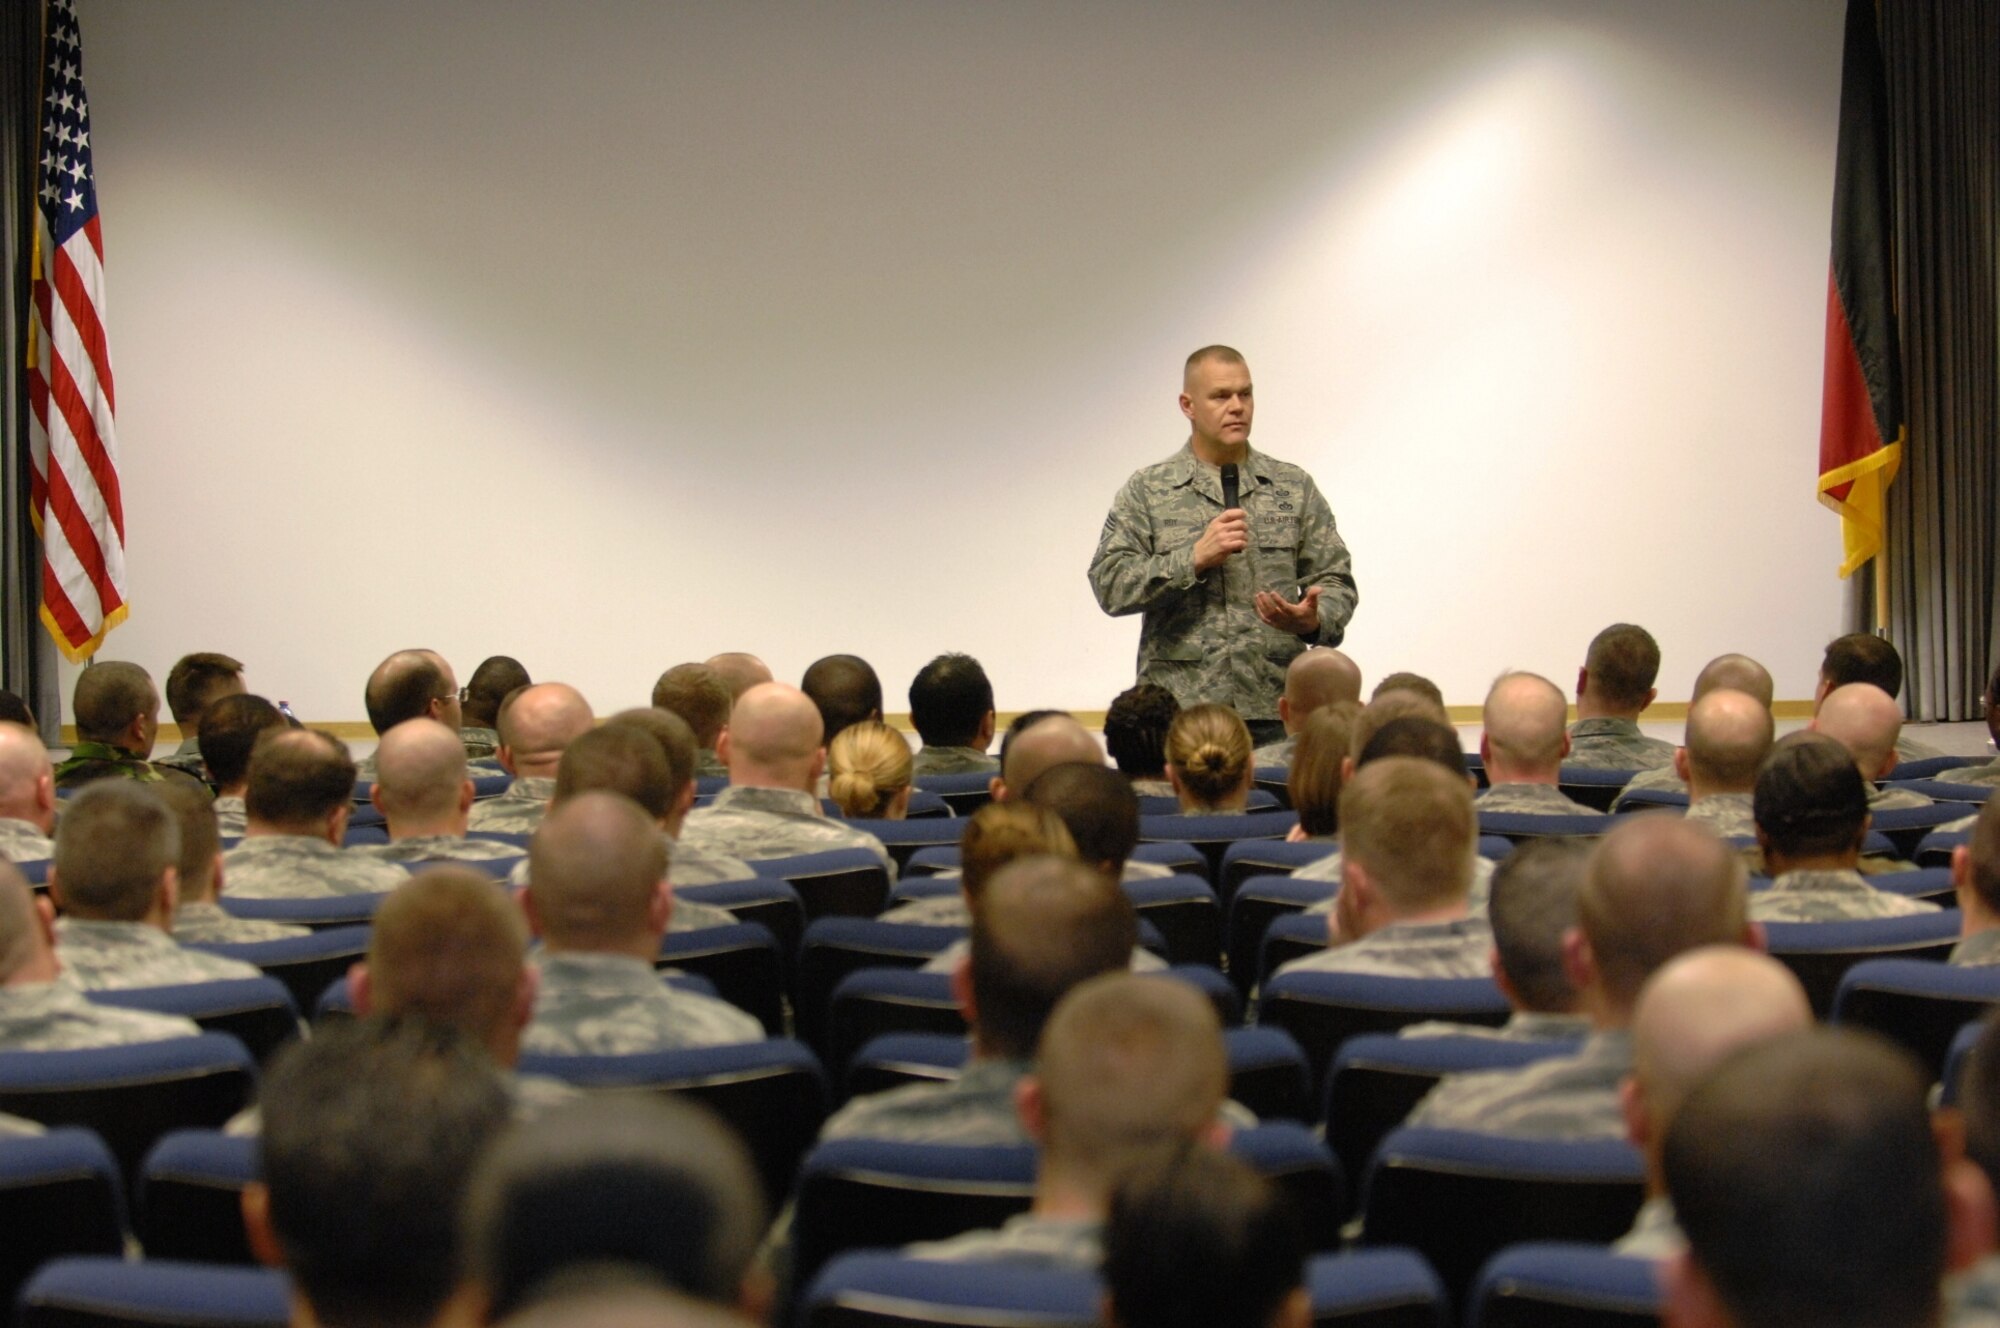 Chief Master Sergeant of the Air Force James Roy talked to Airmen at the Kisling Non-commissioned Officer Academy at Kapaun Air Station, Germany during his visit to U.S. Air Forces in Europe Nov. 24.  CMSAF Roy spoke with the Airmen about his priorities and goals and fielded questions from the audience. (U.S. Air Force photo/Master Sgt. Corey Clements)